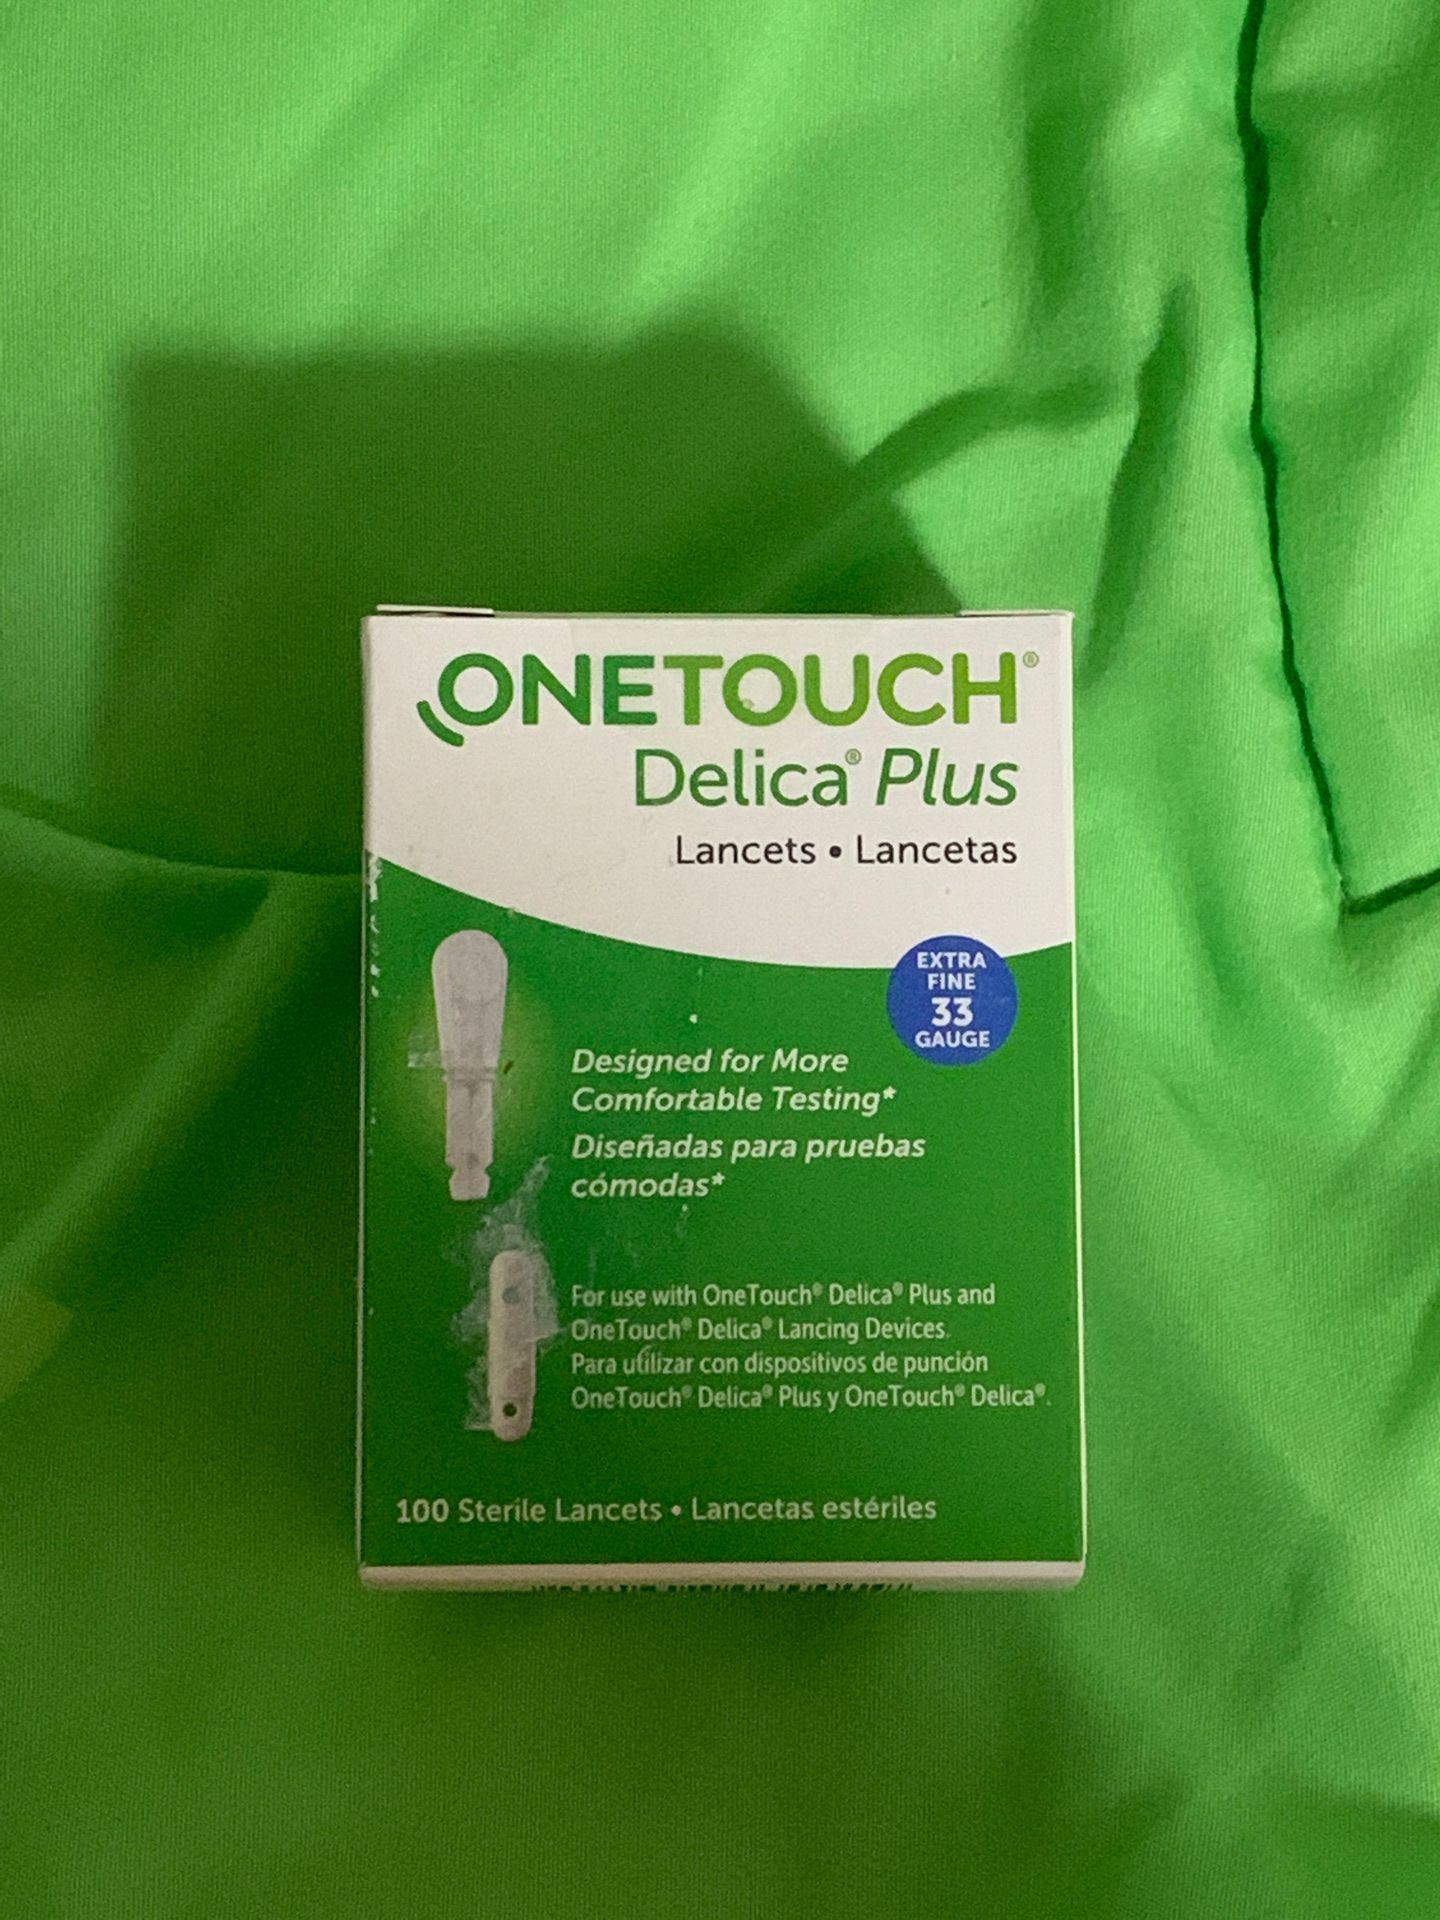 One touch Delica plus lancets, 100, 33 gauge extra fine